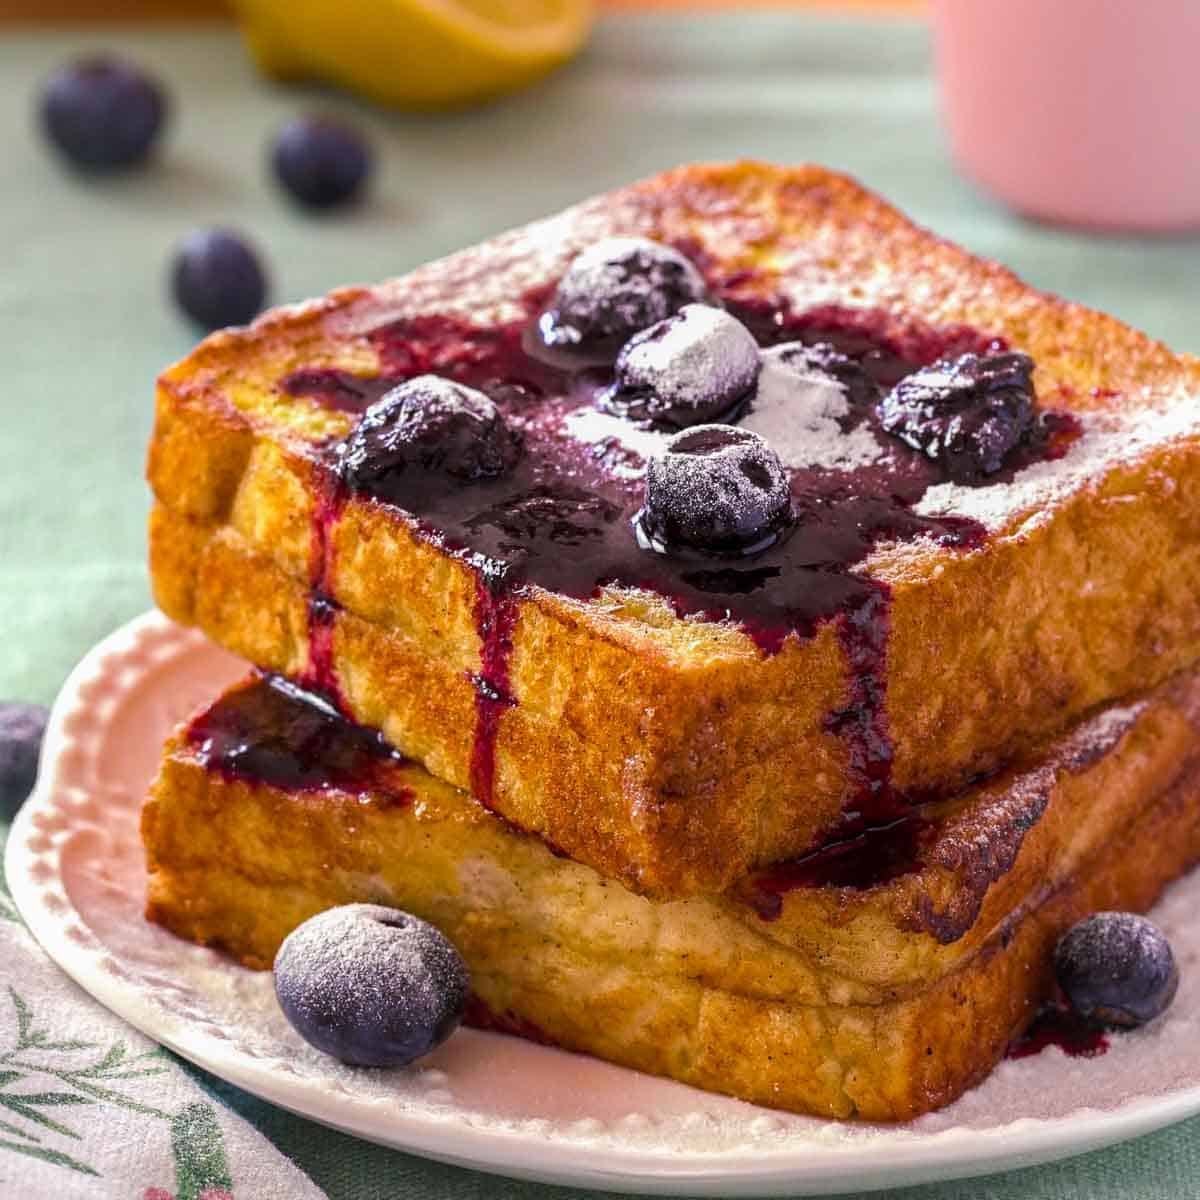 A stack of lemon blueberry french toast on a white plate. The toast is topped with blueberry compote